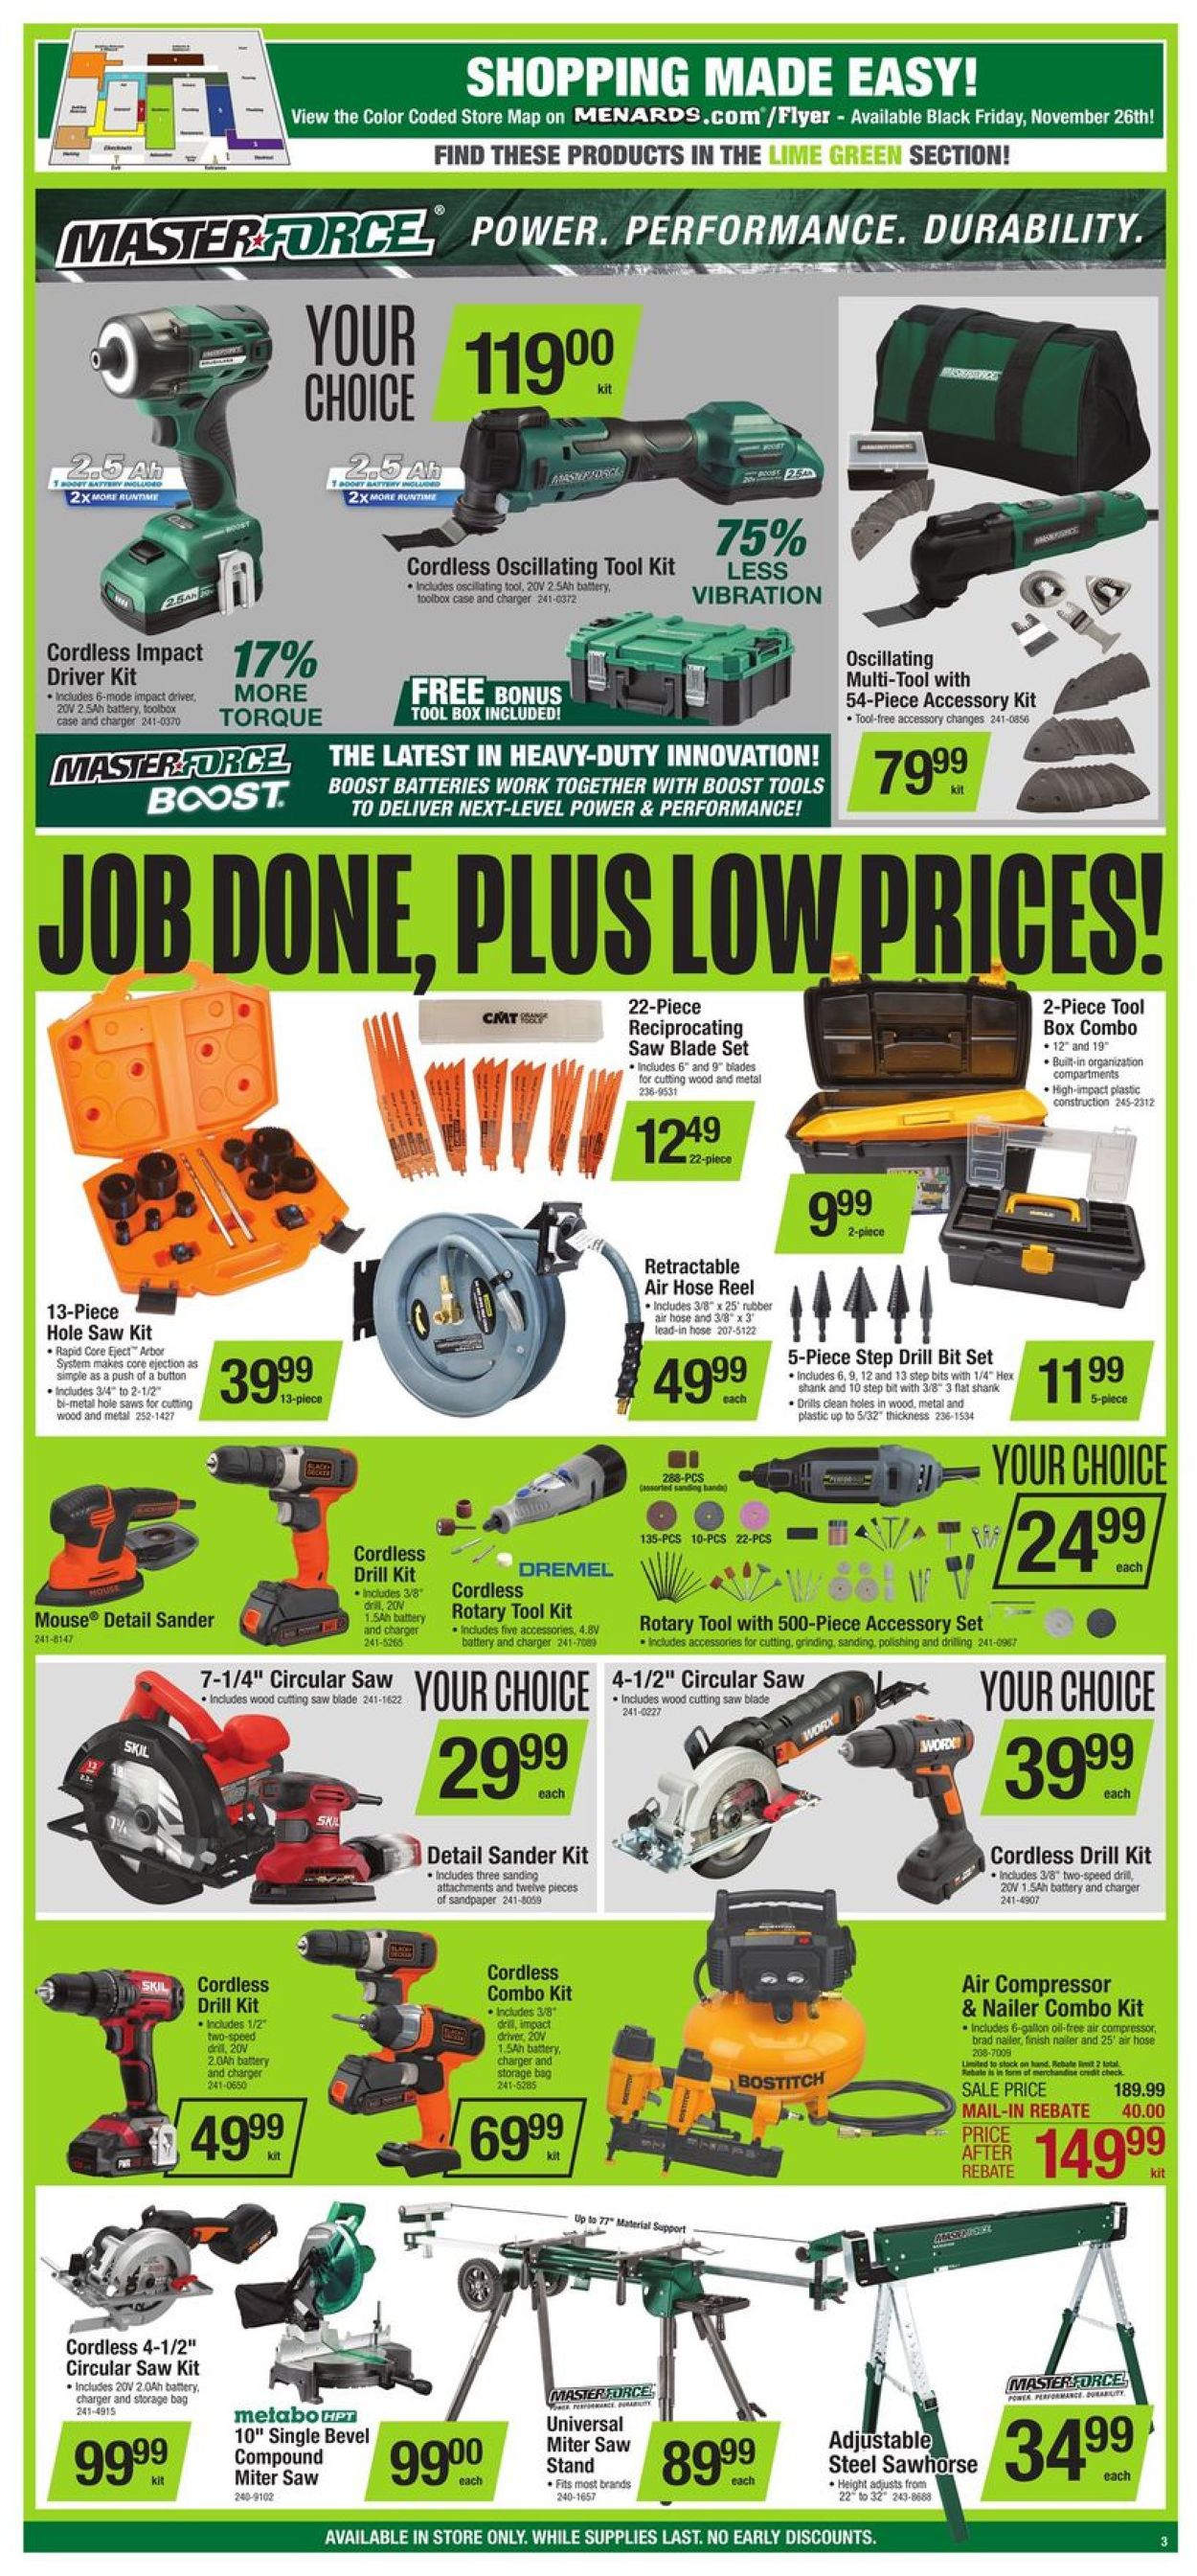 Menards BLACK FRIDAY 2021 Current weekly ad 11/26 12/05/2021 [4